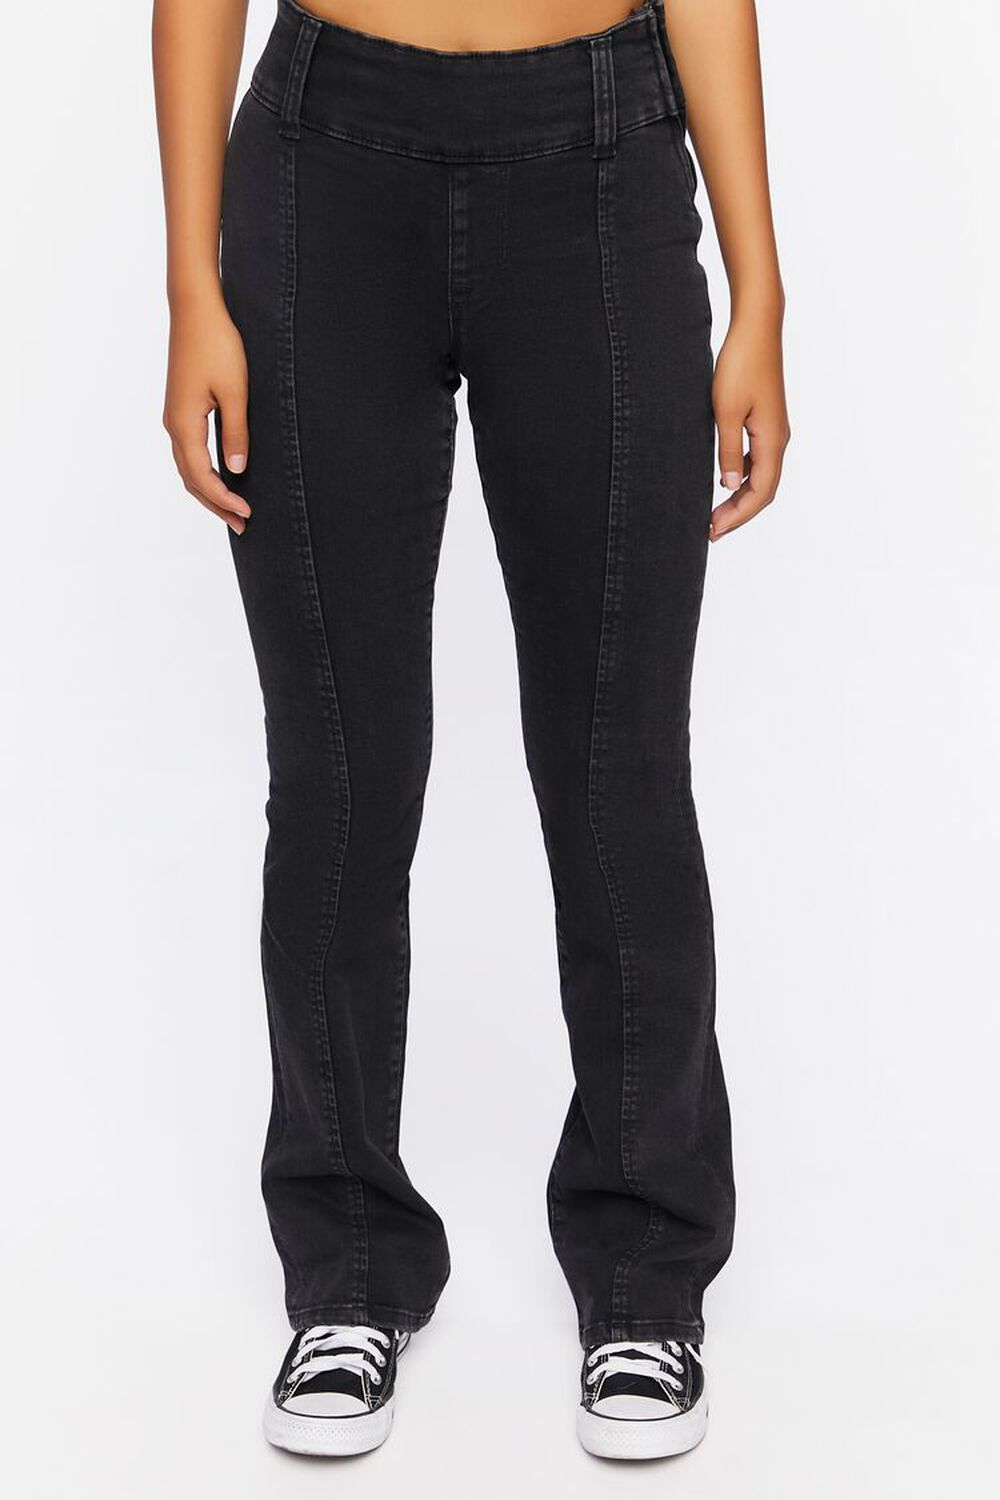 WASHED BLACK Bootcut Mid-Rise Jeans, image 2